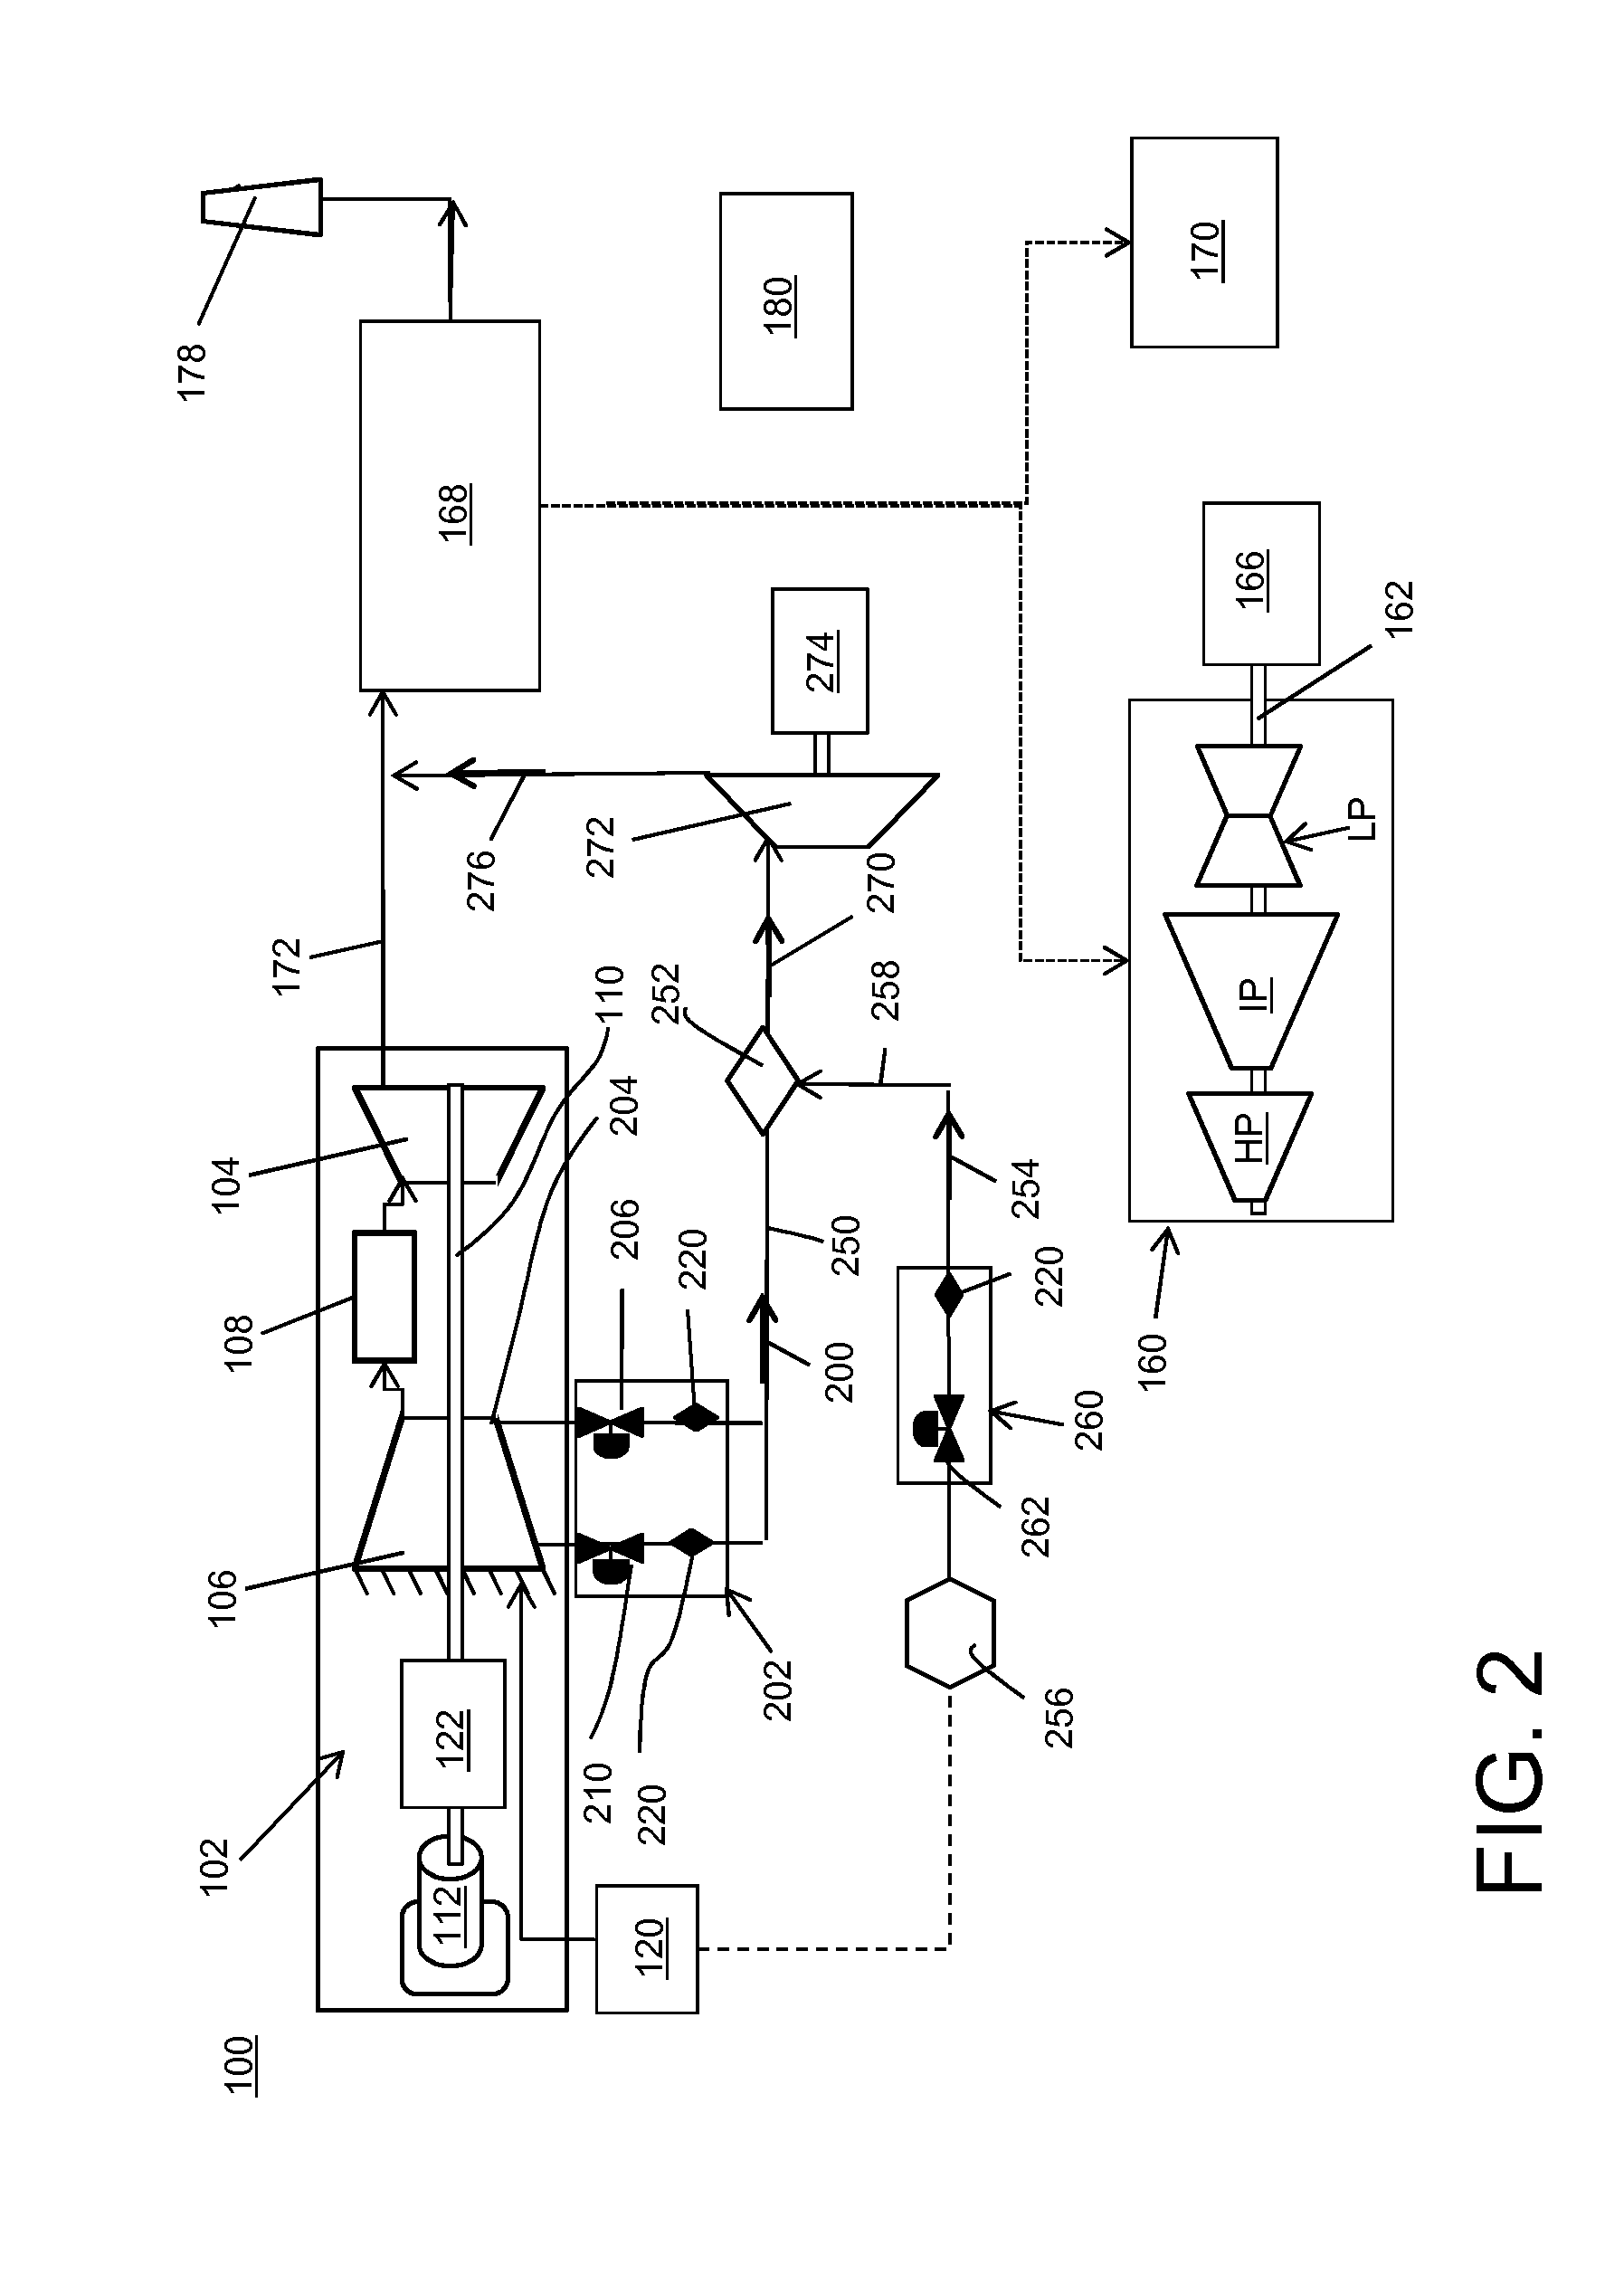 Power generation system having compressor creating excess air flow and turbo-expander for supplemental generator